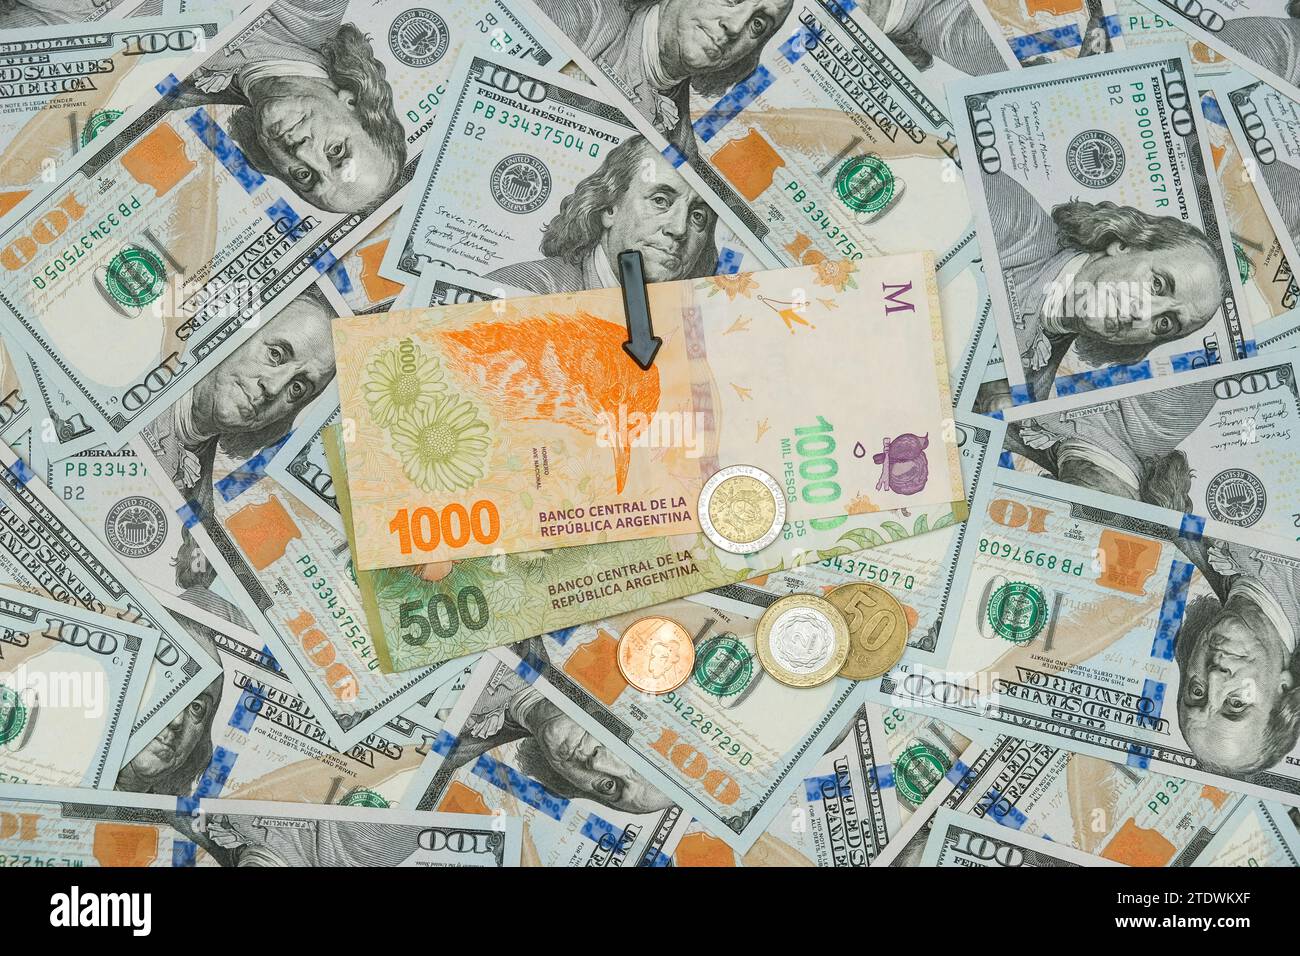 Argentina Banknotes And Coins With Black Arrow Heading Downward On US Dollars Background. Meaning The Devaluation Of The Argentine Peso. Stock Photo